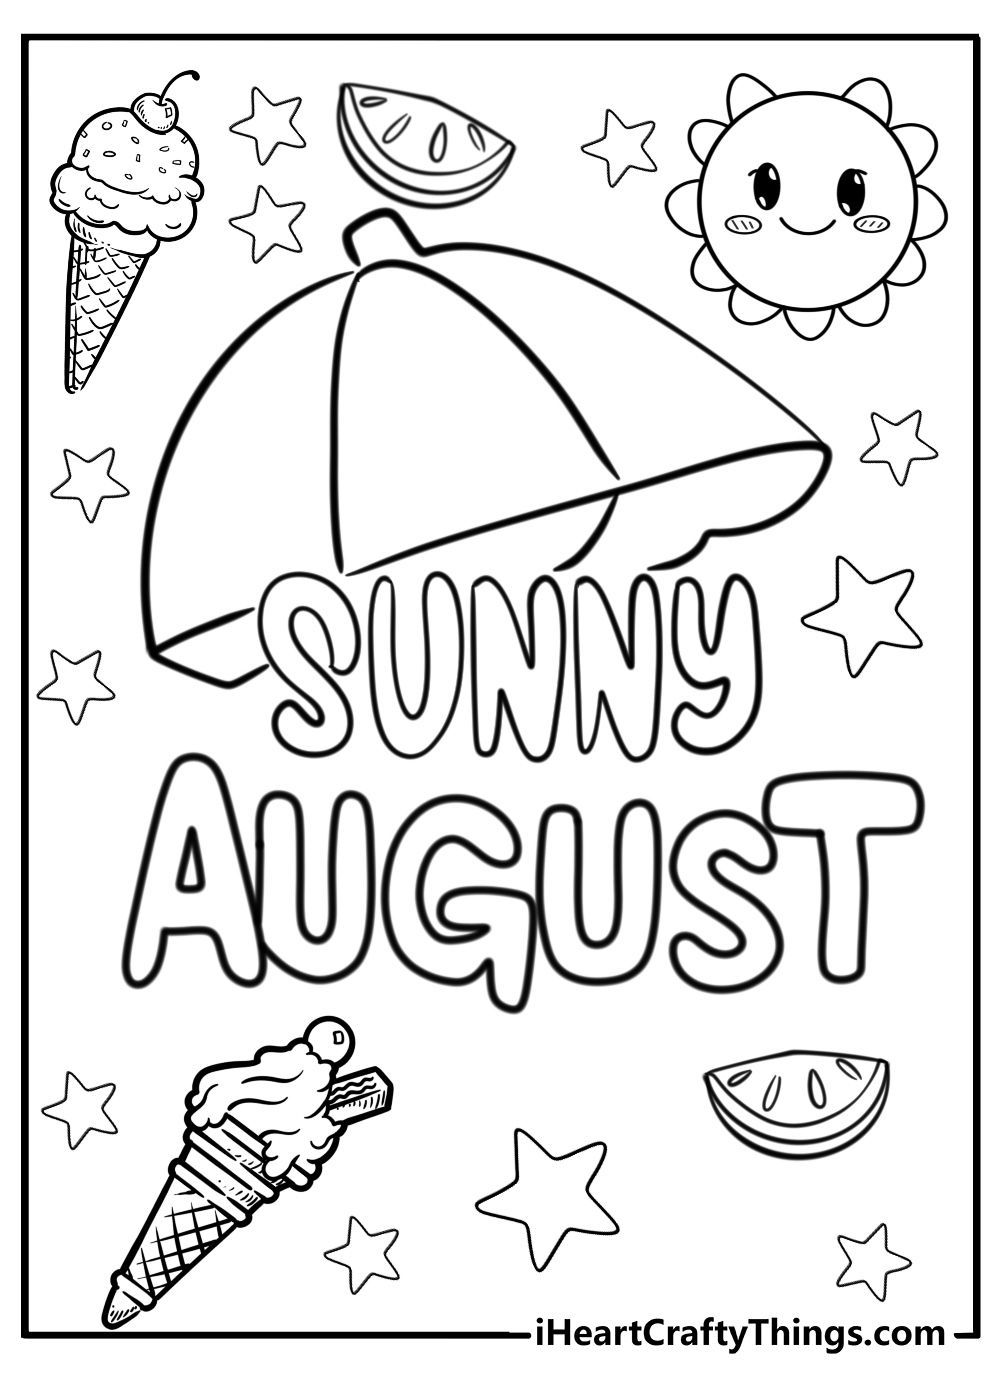 Sunny august coloring sheet